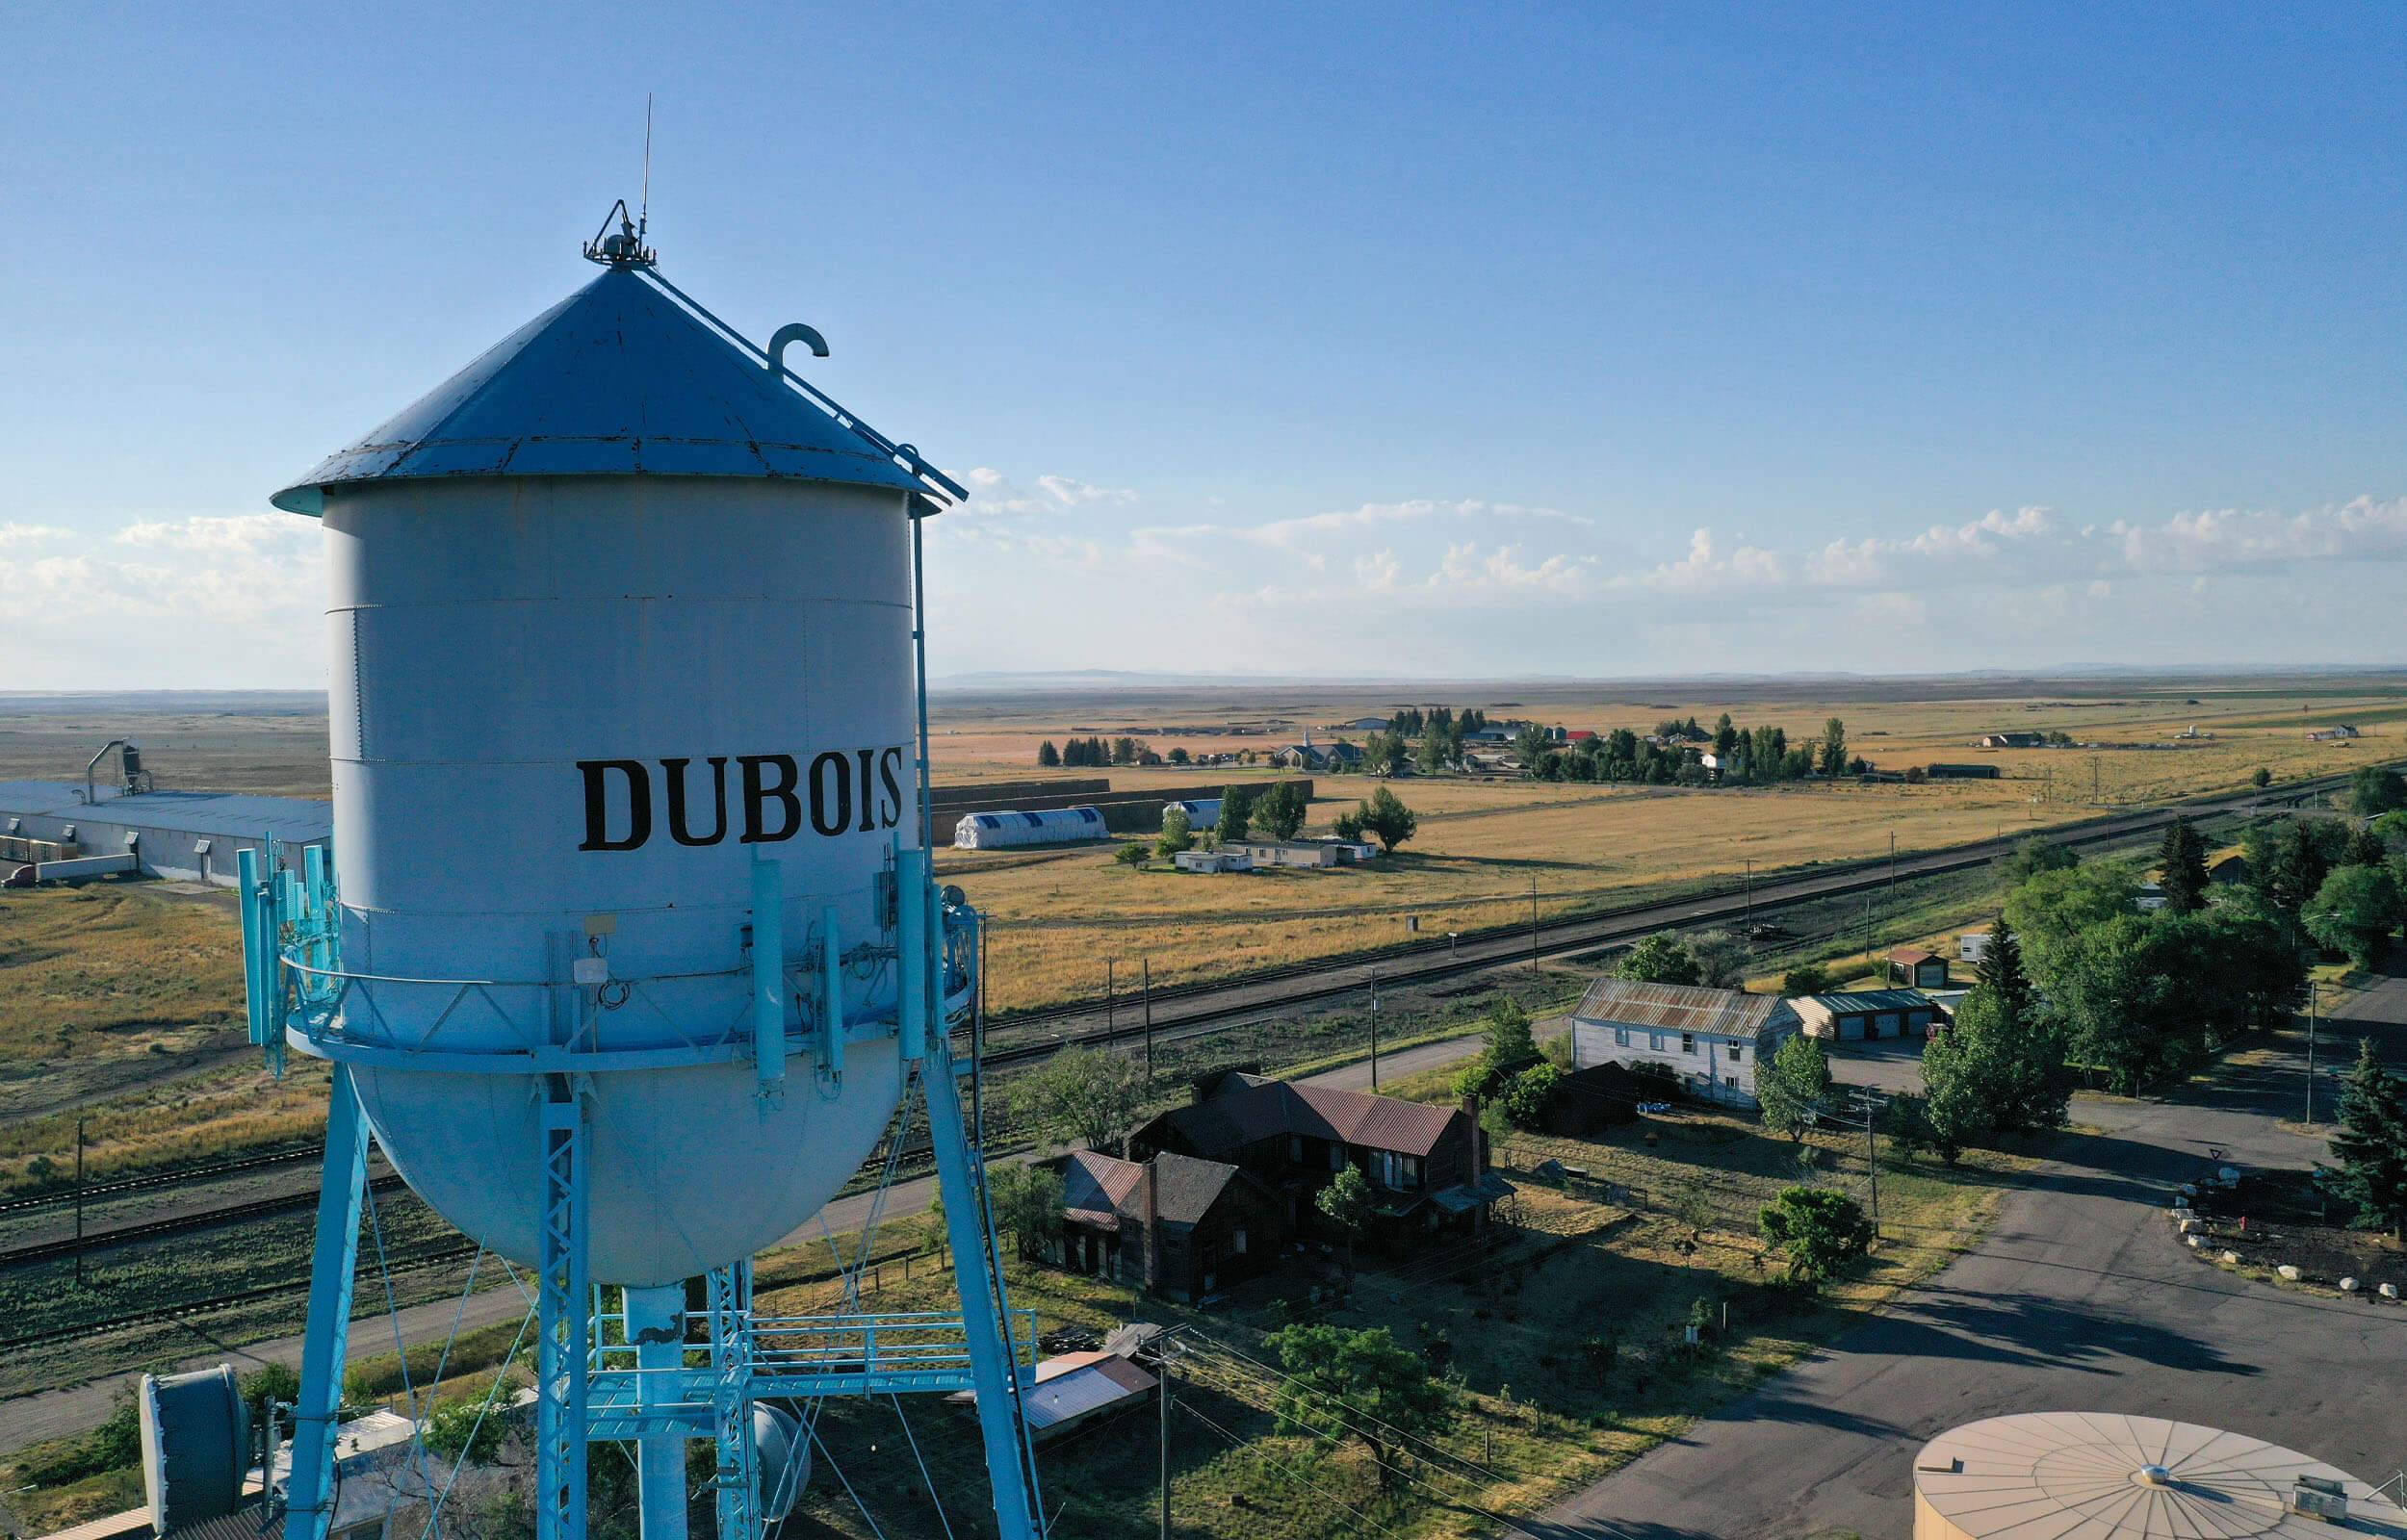 Water tower for the town of Dubois.